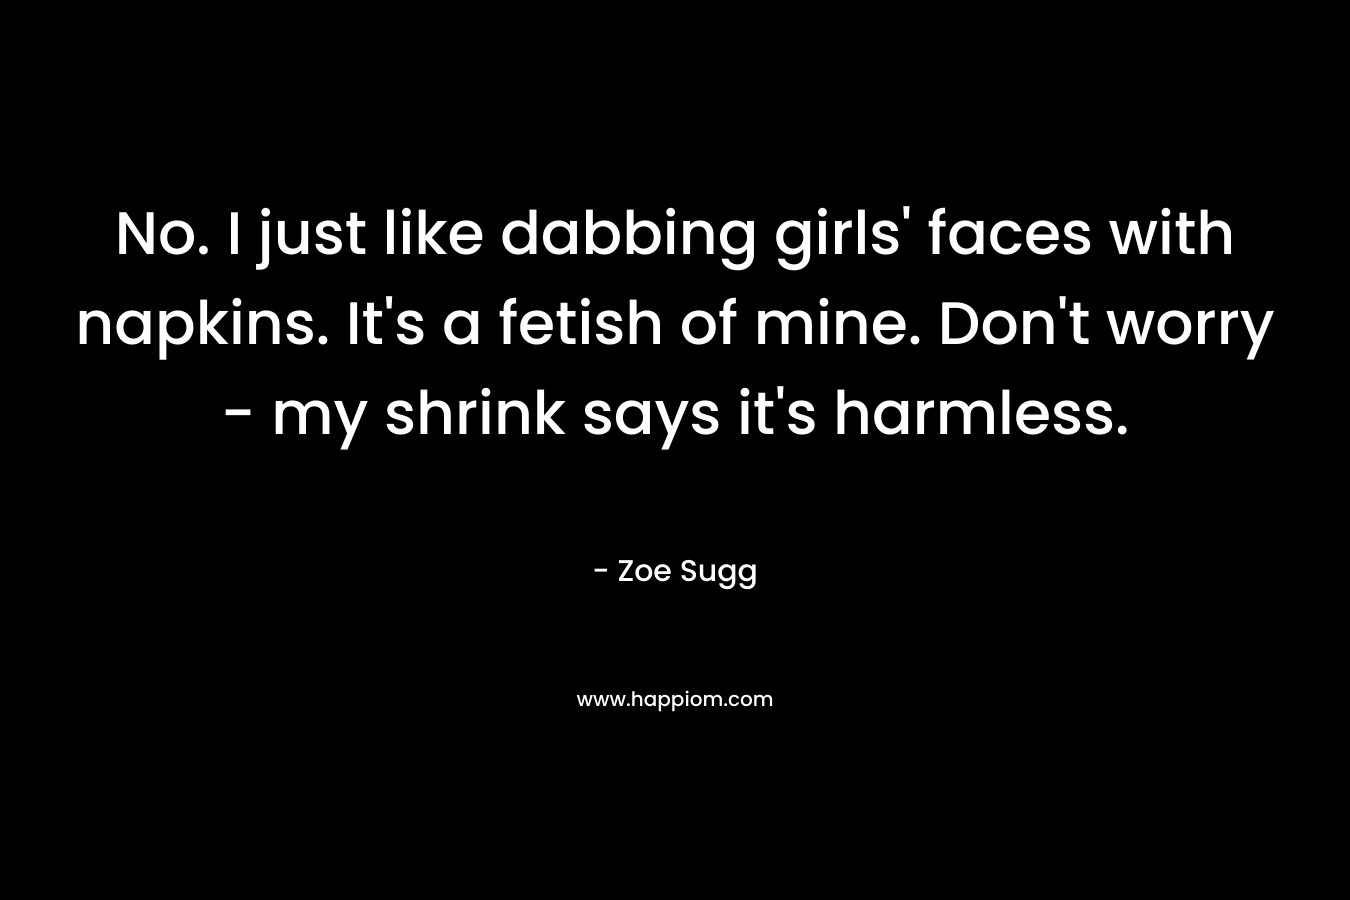 No. I just like dabbing girls' faces with napkins. It's a fetish of mine. Don't worry - my shrink says it's harmless.